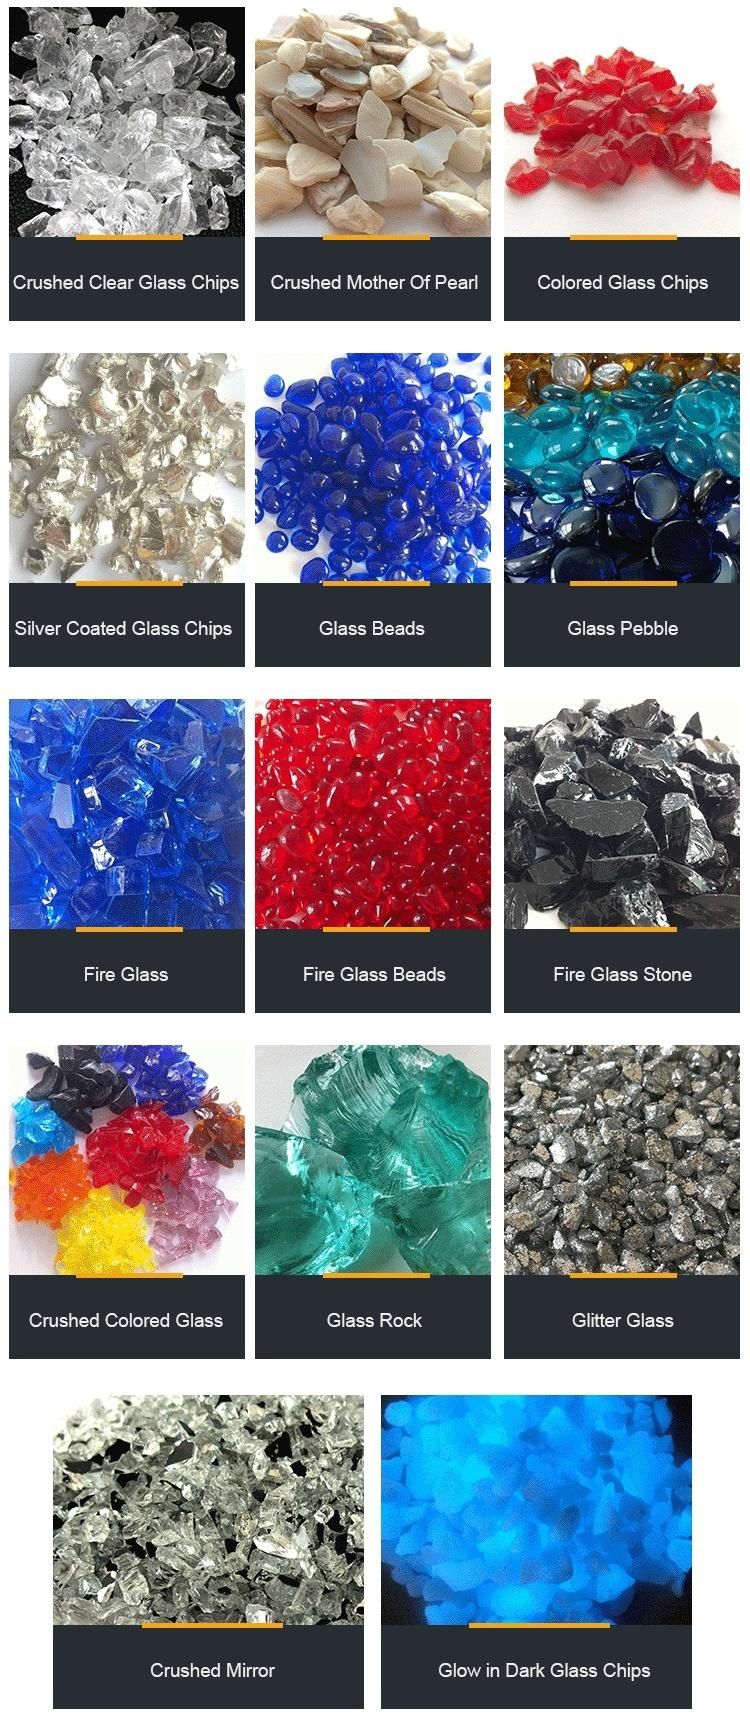 Recycled Crushed Clear Glass Blast Medium for Blasting Industry